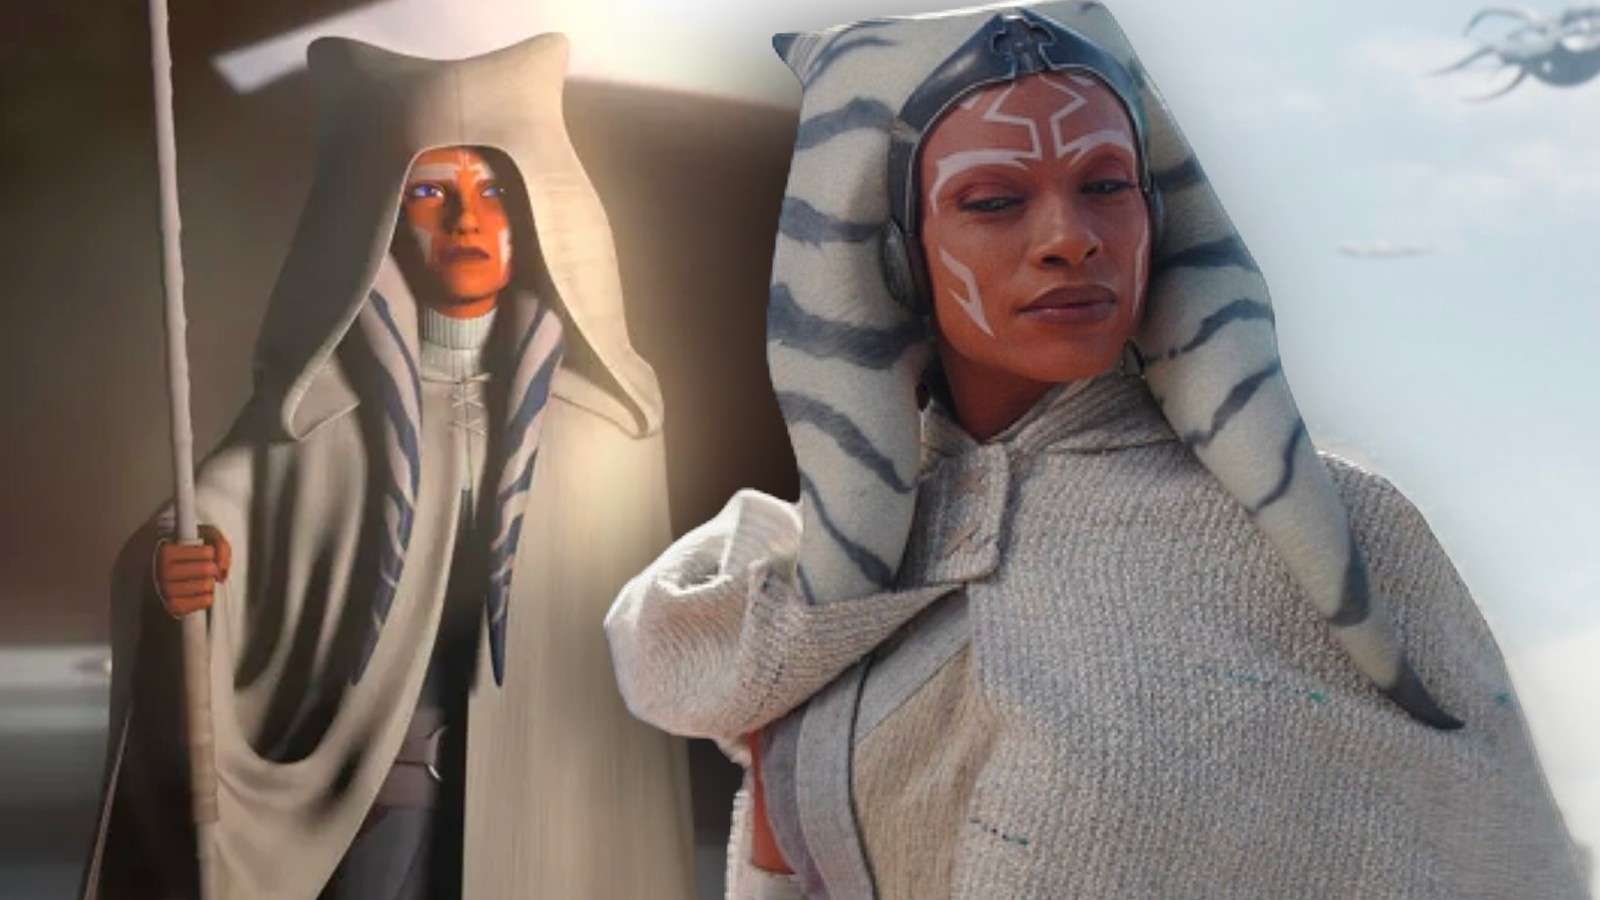 Ahsoka the White in Star Wars Rebels and the TV show